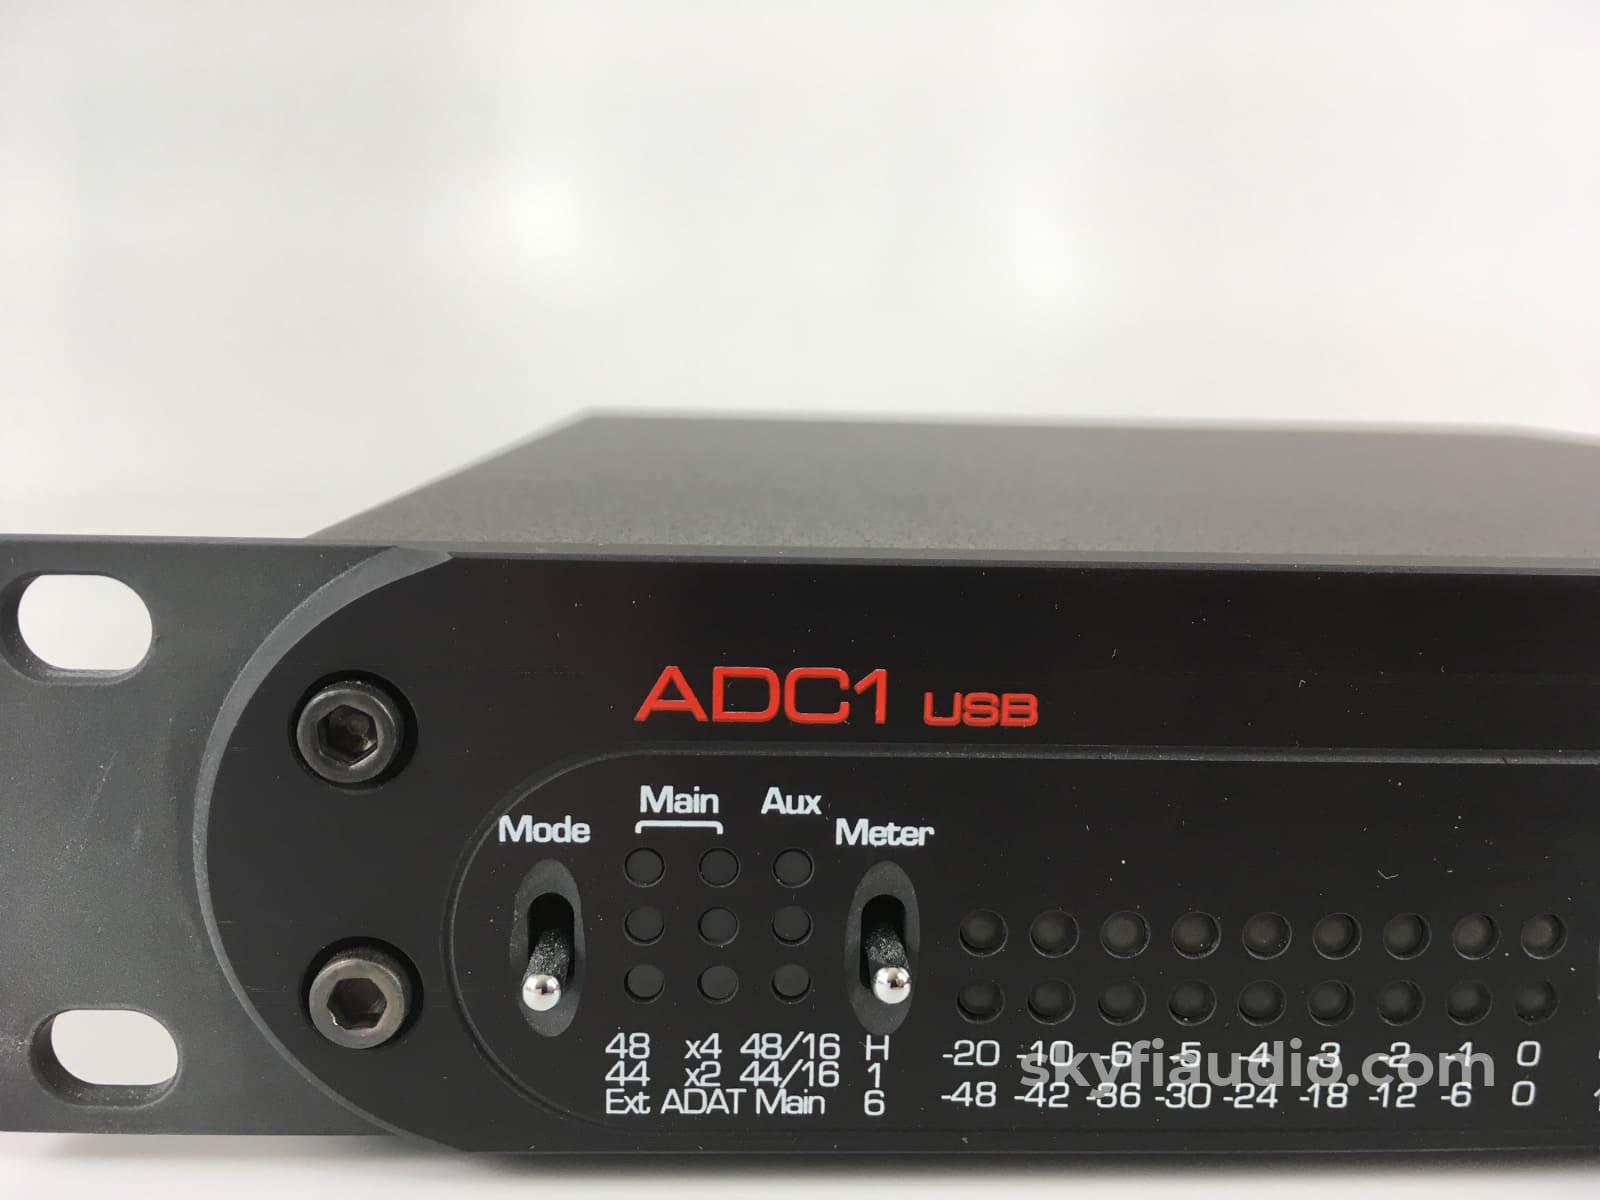 Benchmark Adc1-Usb Analogue To Digital Converter Amplifier